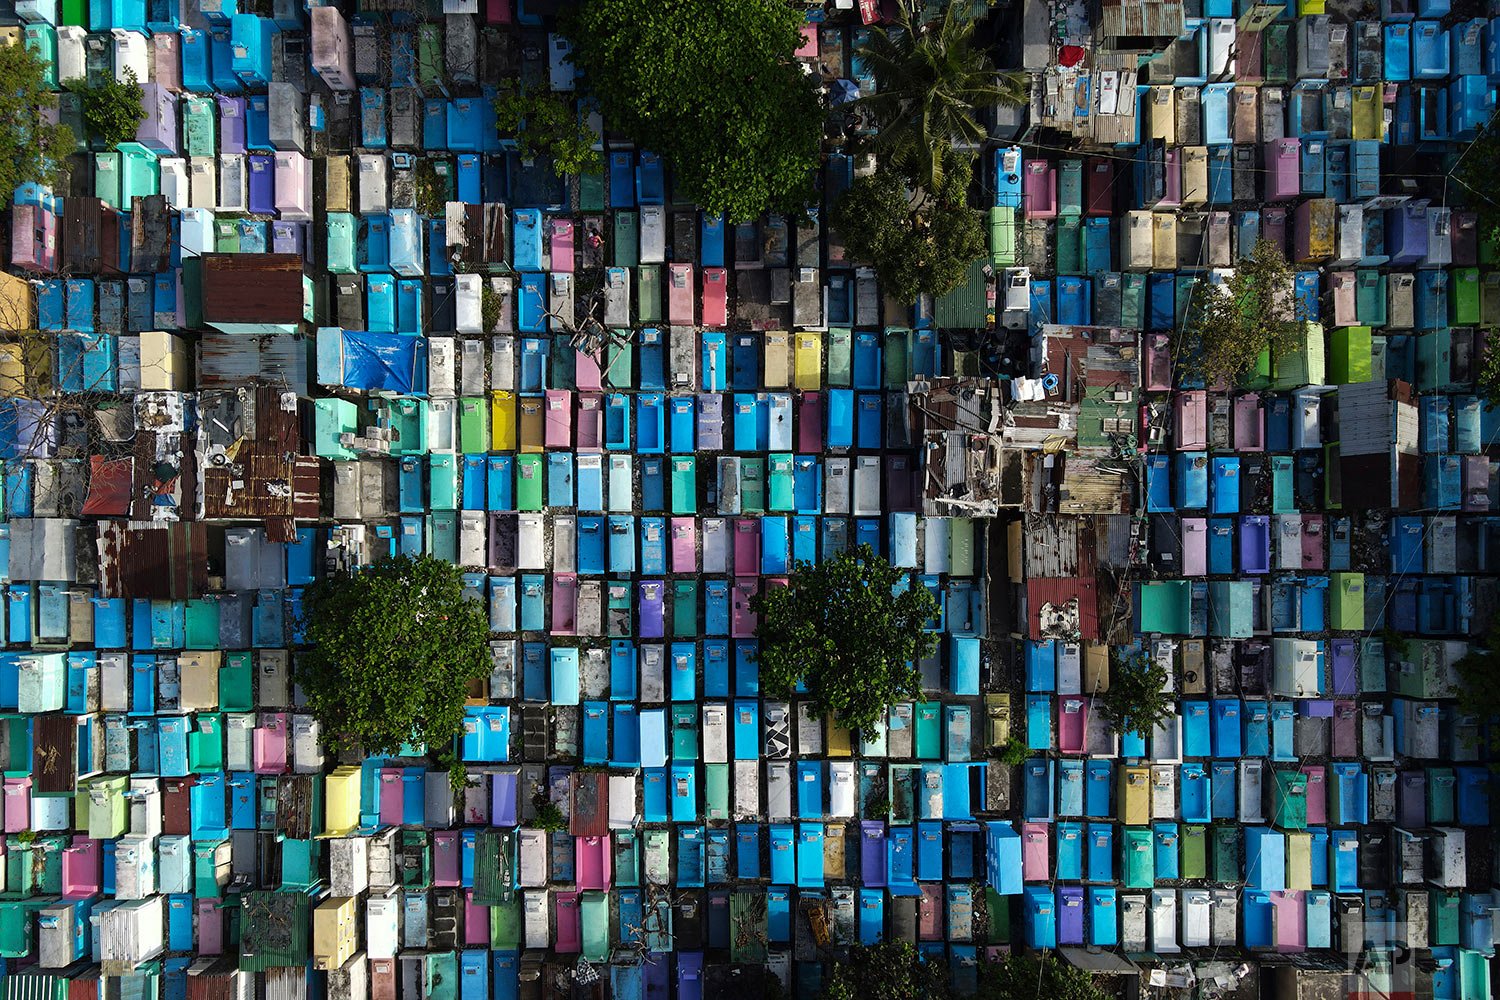  Rows of tombs remain without the usual visitors on All Saint's Day at Manila's North Cemetery, Philippines on Monday, Nov. 1, 2021. (AP Photo/Aaron Favila) 